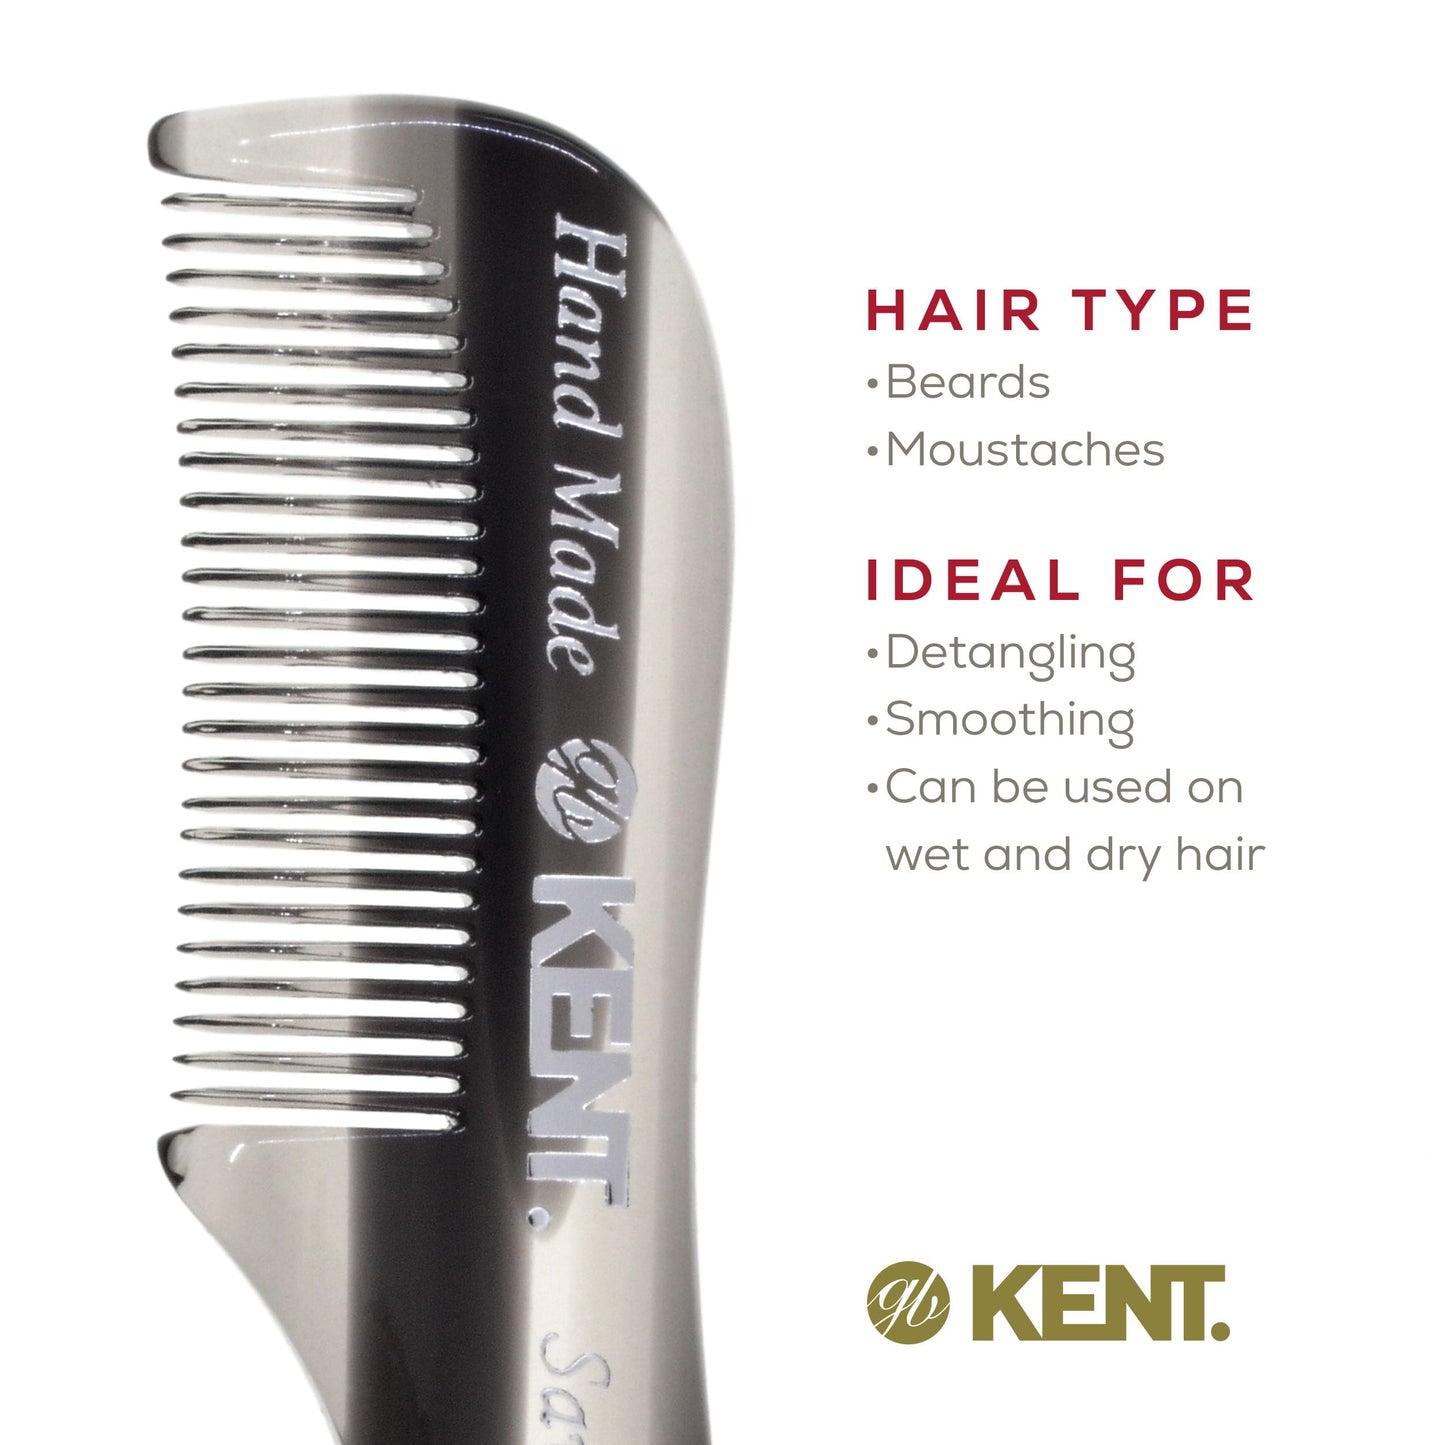 Kent A 81T Graphite X-Small Men's Beard Mustache Pocket Comb, Fine Toothed Pocket for Facial Hair Grooming and Styling. Hand-Made of Quality Cellulose Acetate, Saw-cut Hand Polished. Made in England